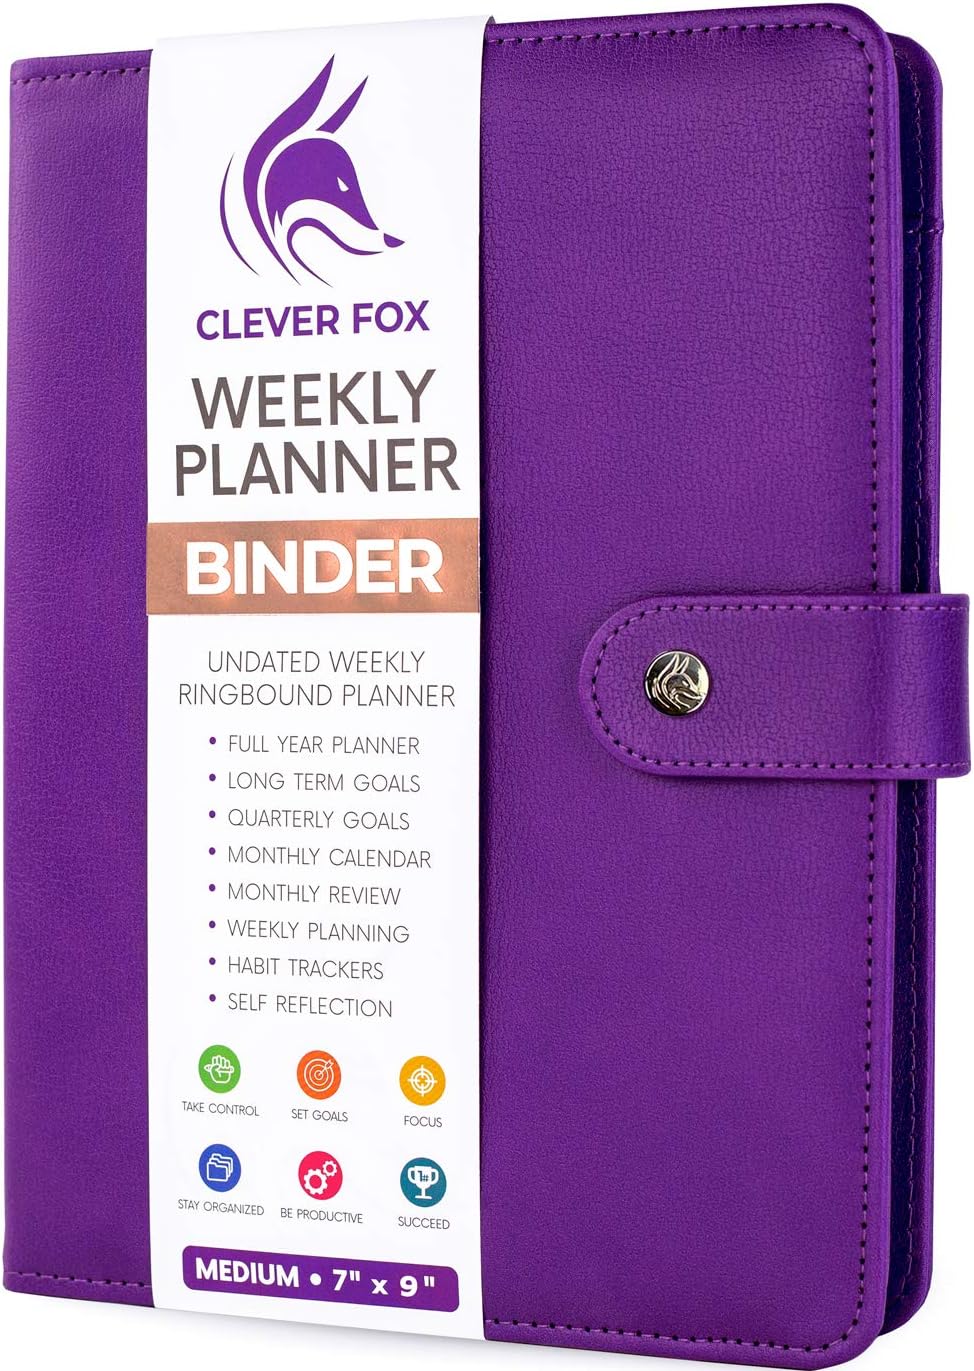 Clever Fox Weekly Planner Binder – Goal Setting [...]